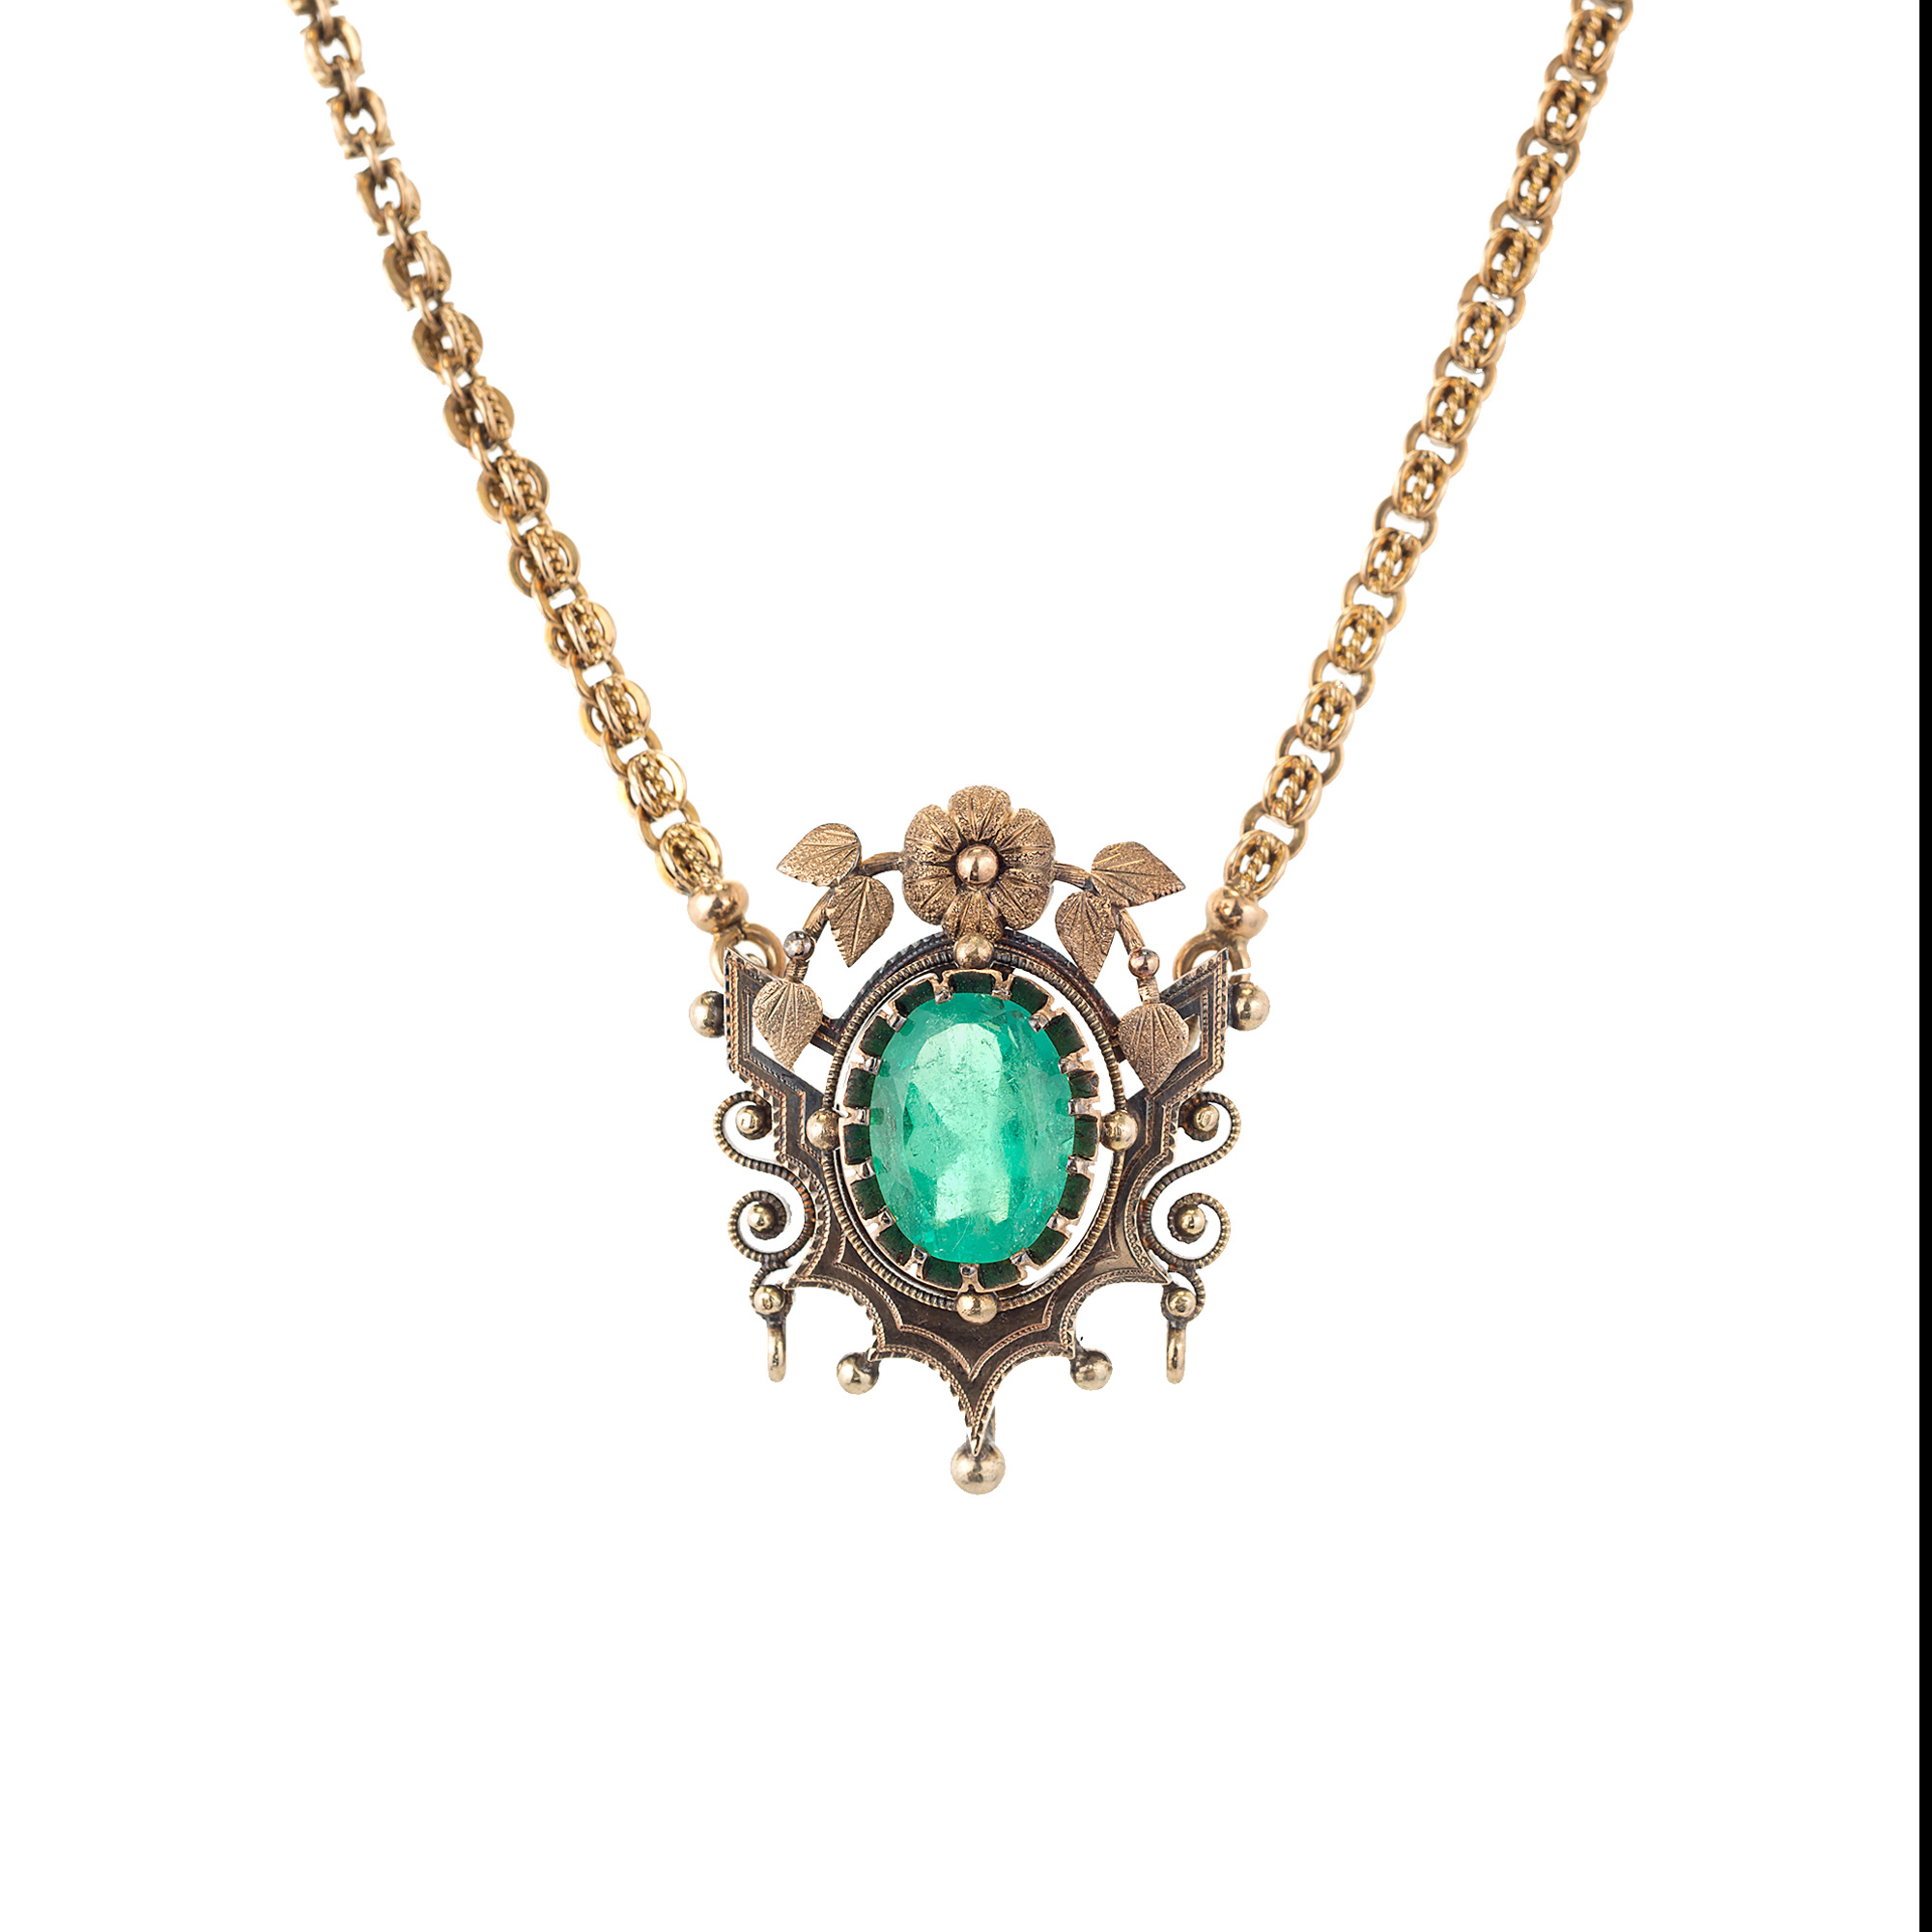 Victorian Oval Emerald Necklace 14k Gold 1860 GIA Certified 4.50ct | eBay